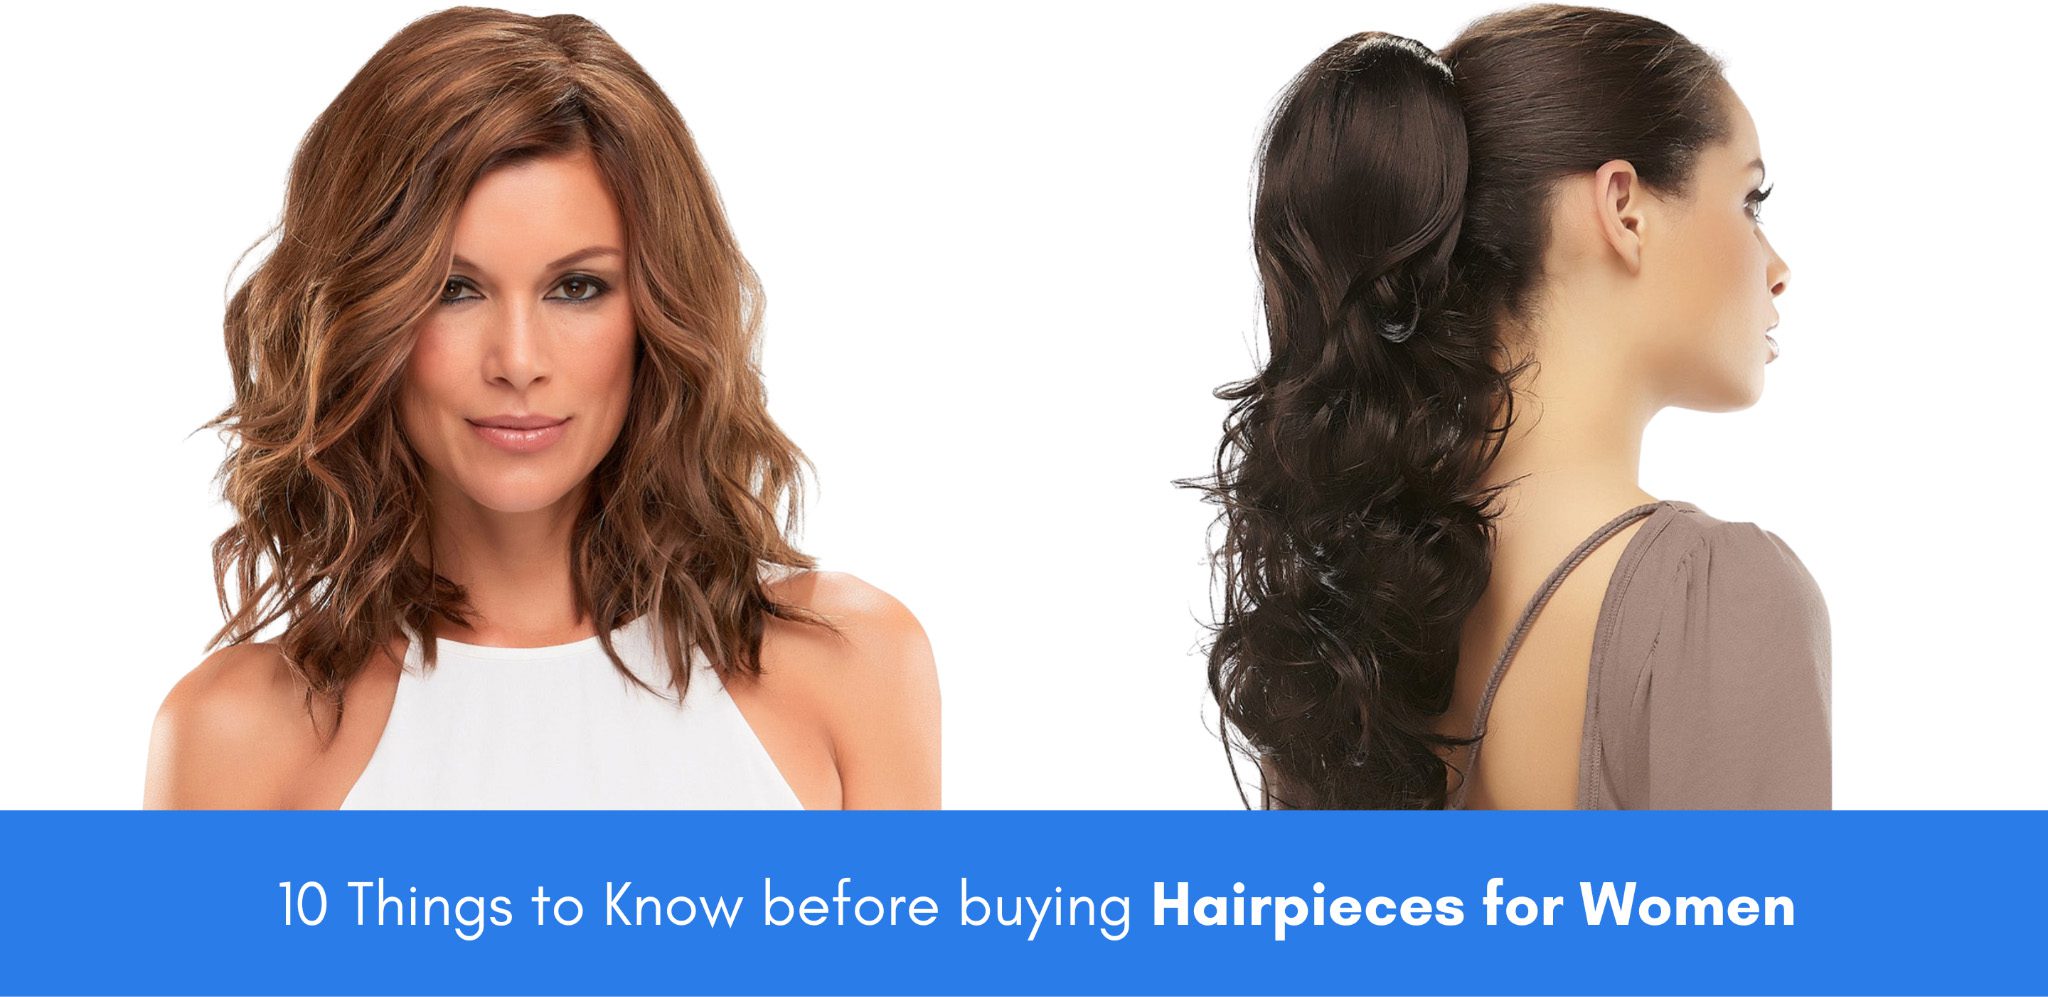 10 Things to Know before buying hair pieces for women